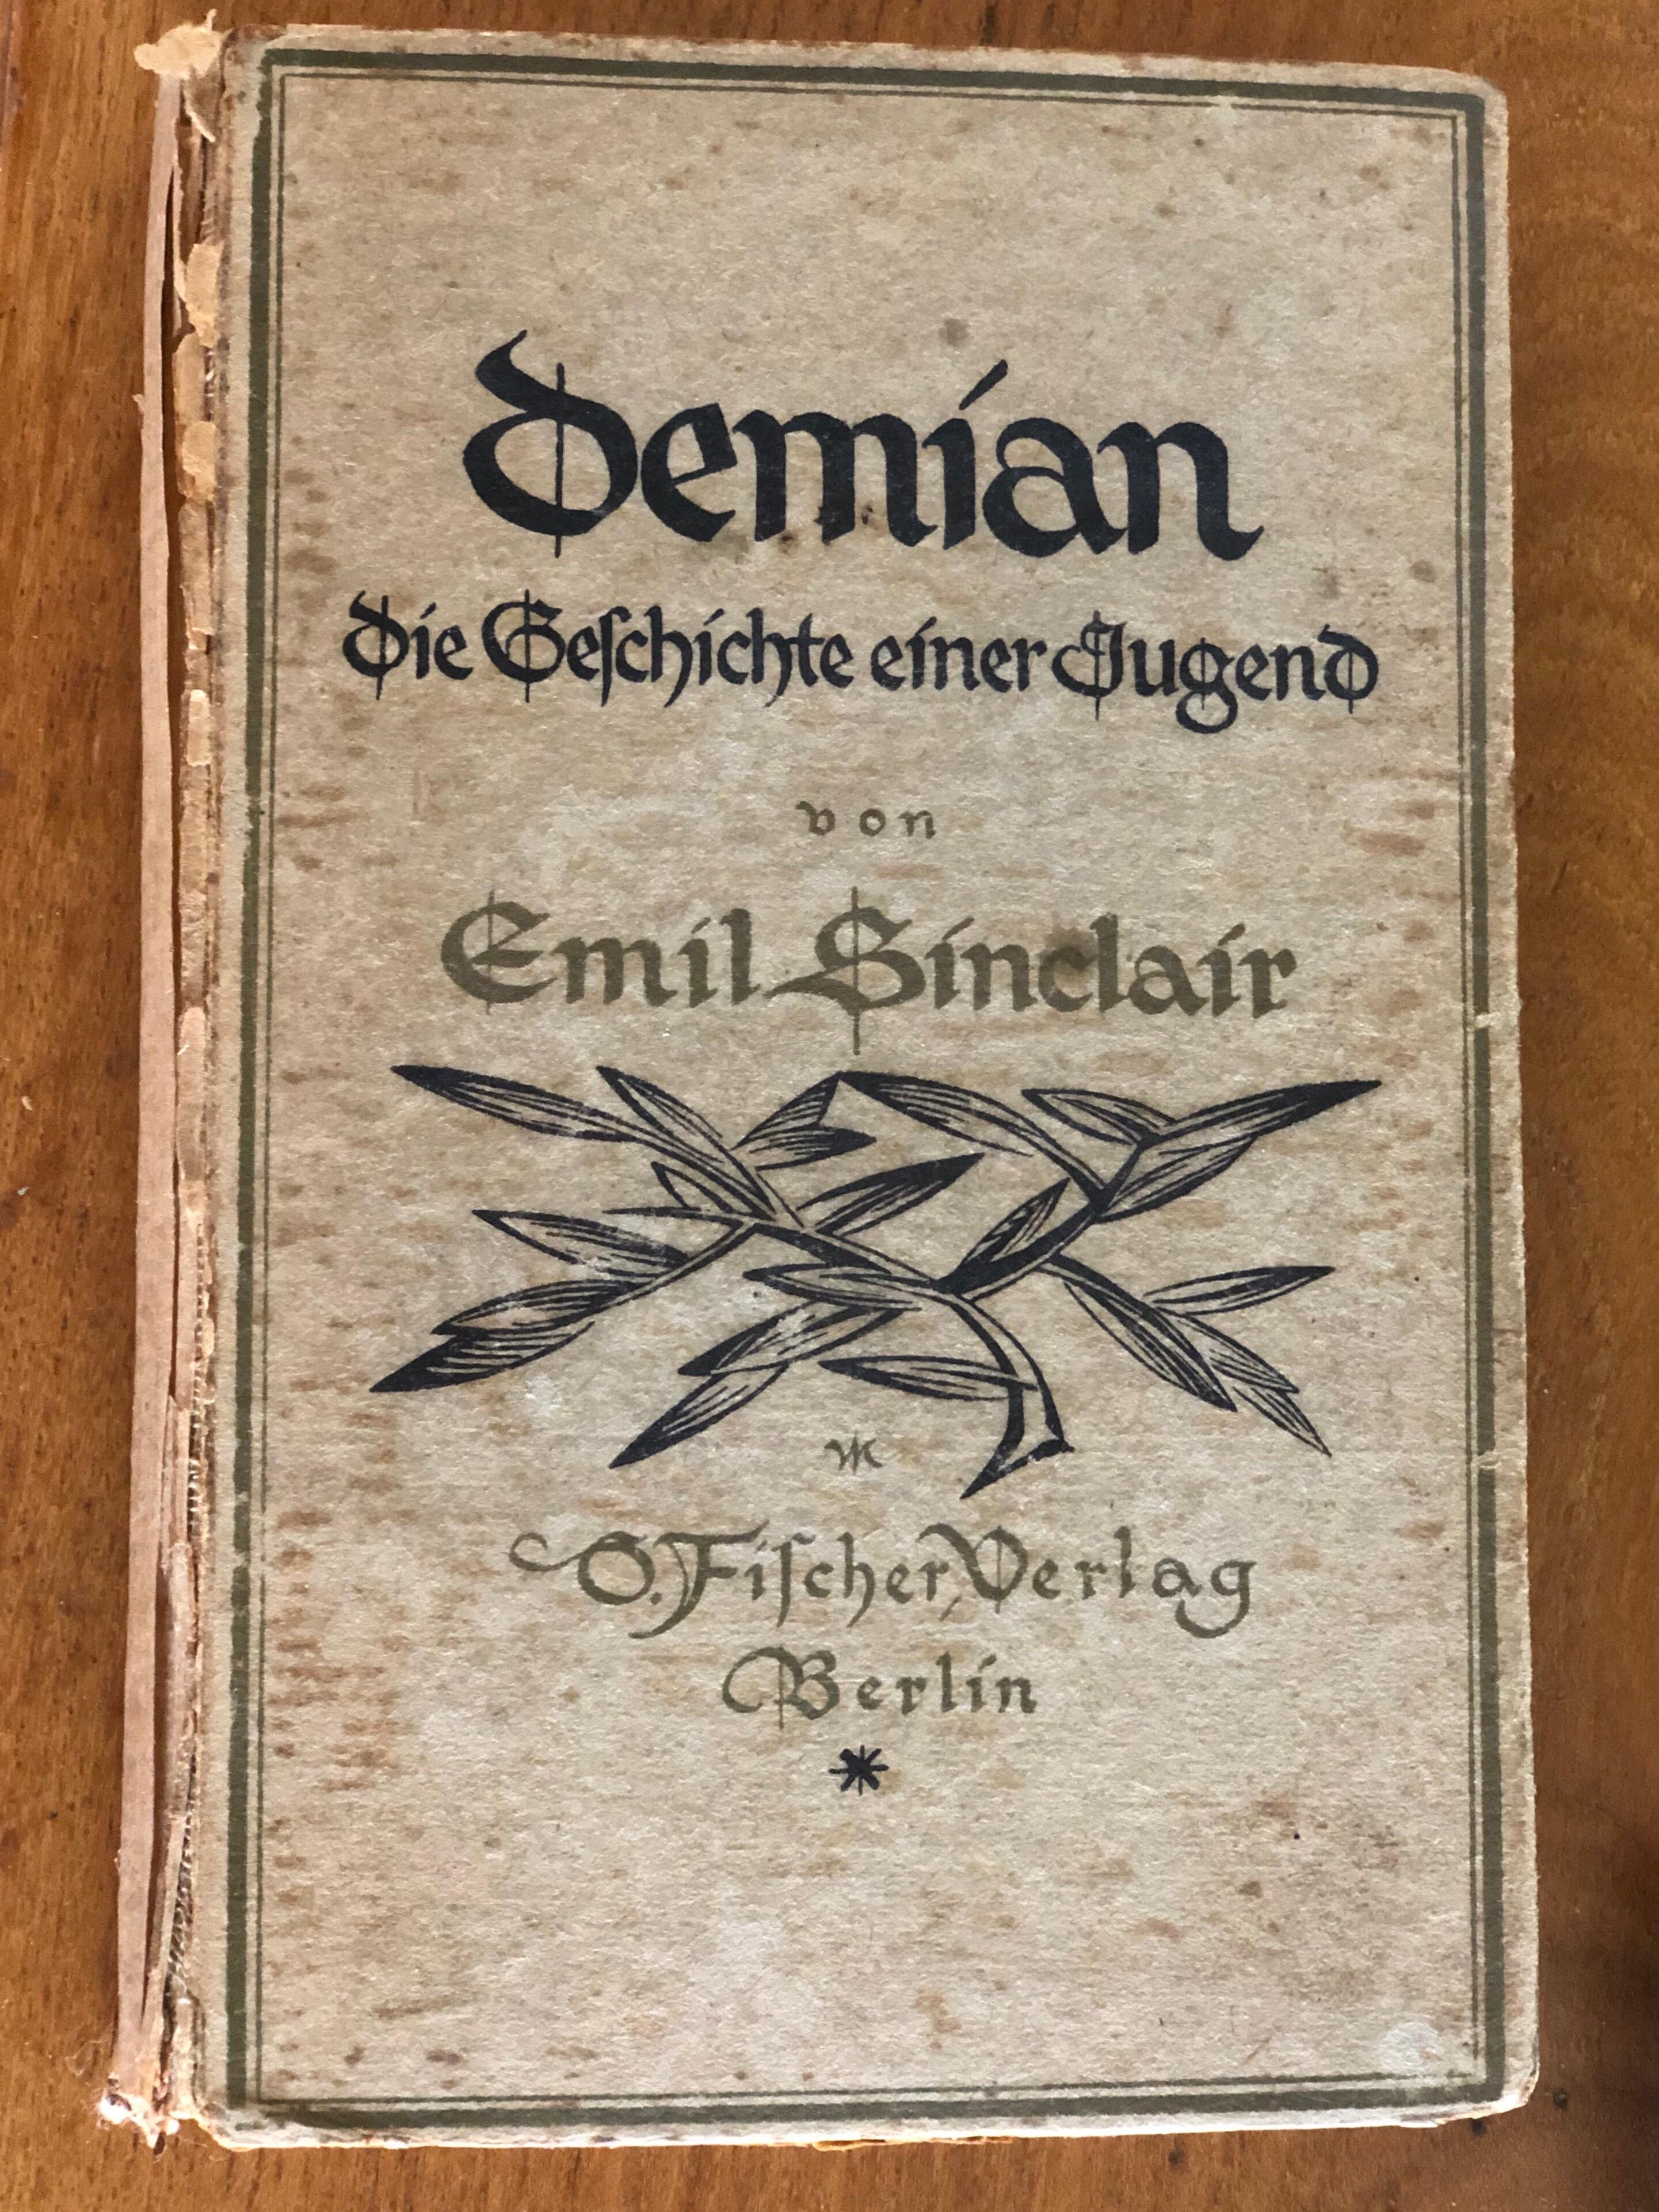 German Novel Demian, The Story of Emil Sinclair's Youth by Hermann Hesse, Berlin, 1919